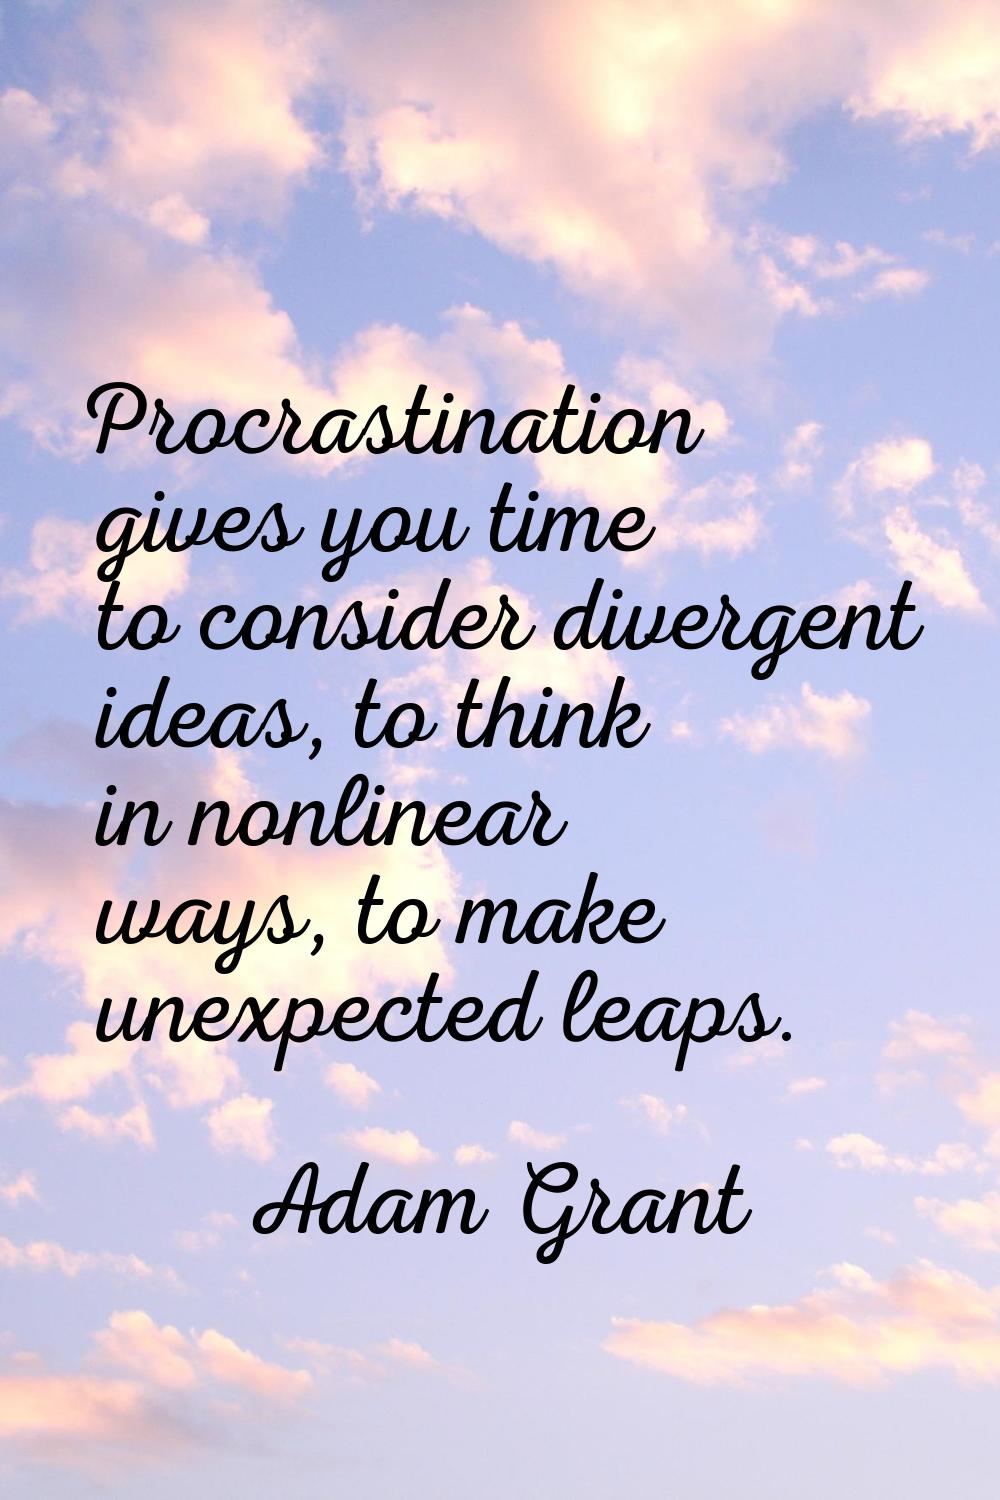 Procrastination gives you time to consider divergent ideas, to think in nonlinear ways, to make une